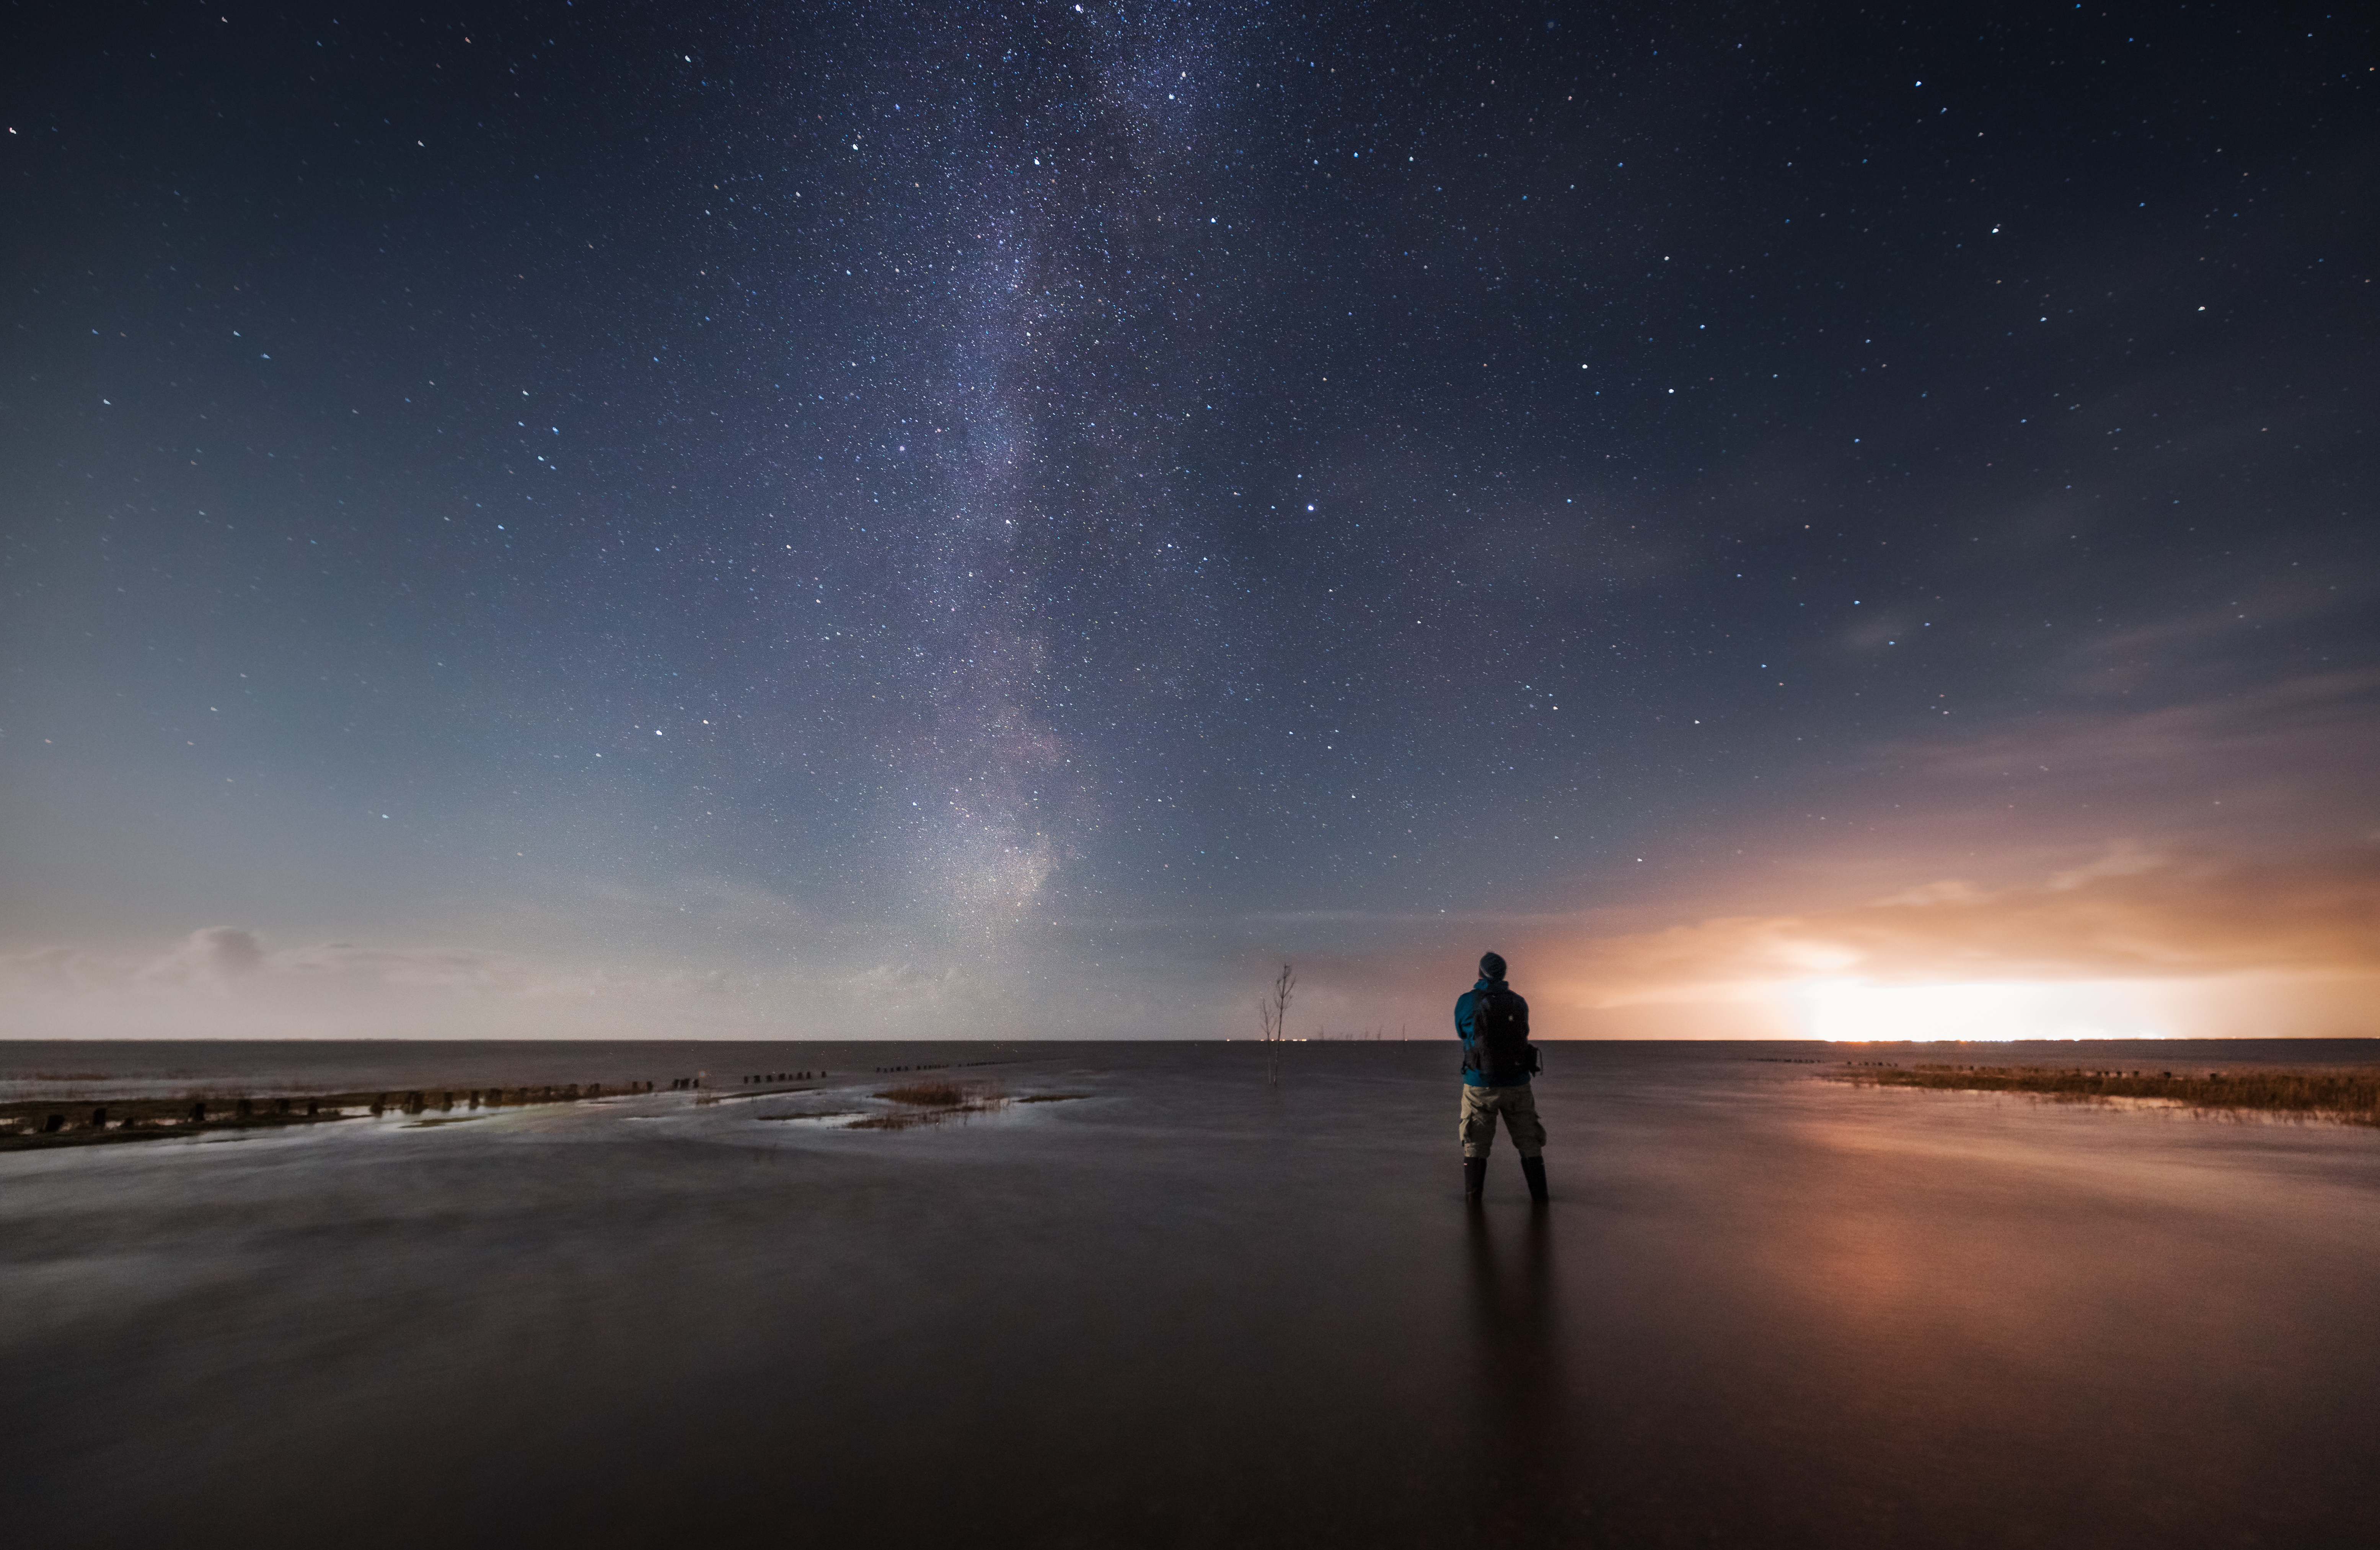 A star-filled night sky and Milky Way over the Wadden Sea.